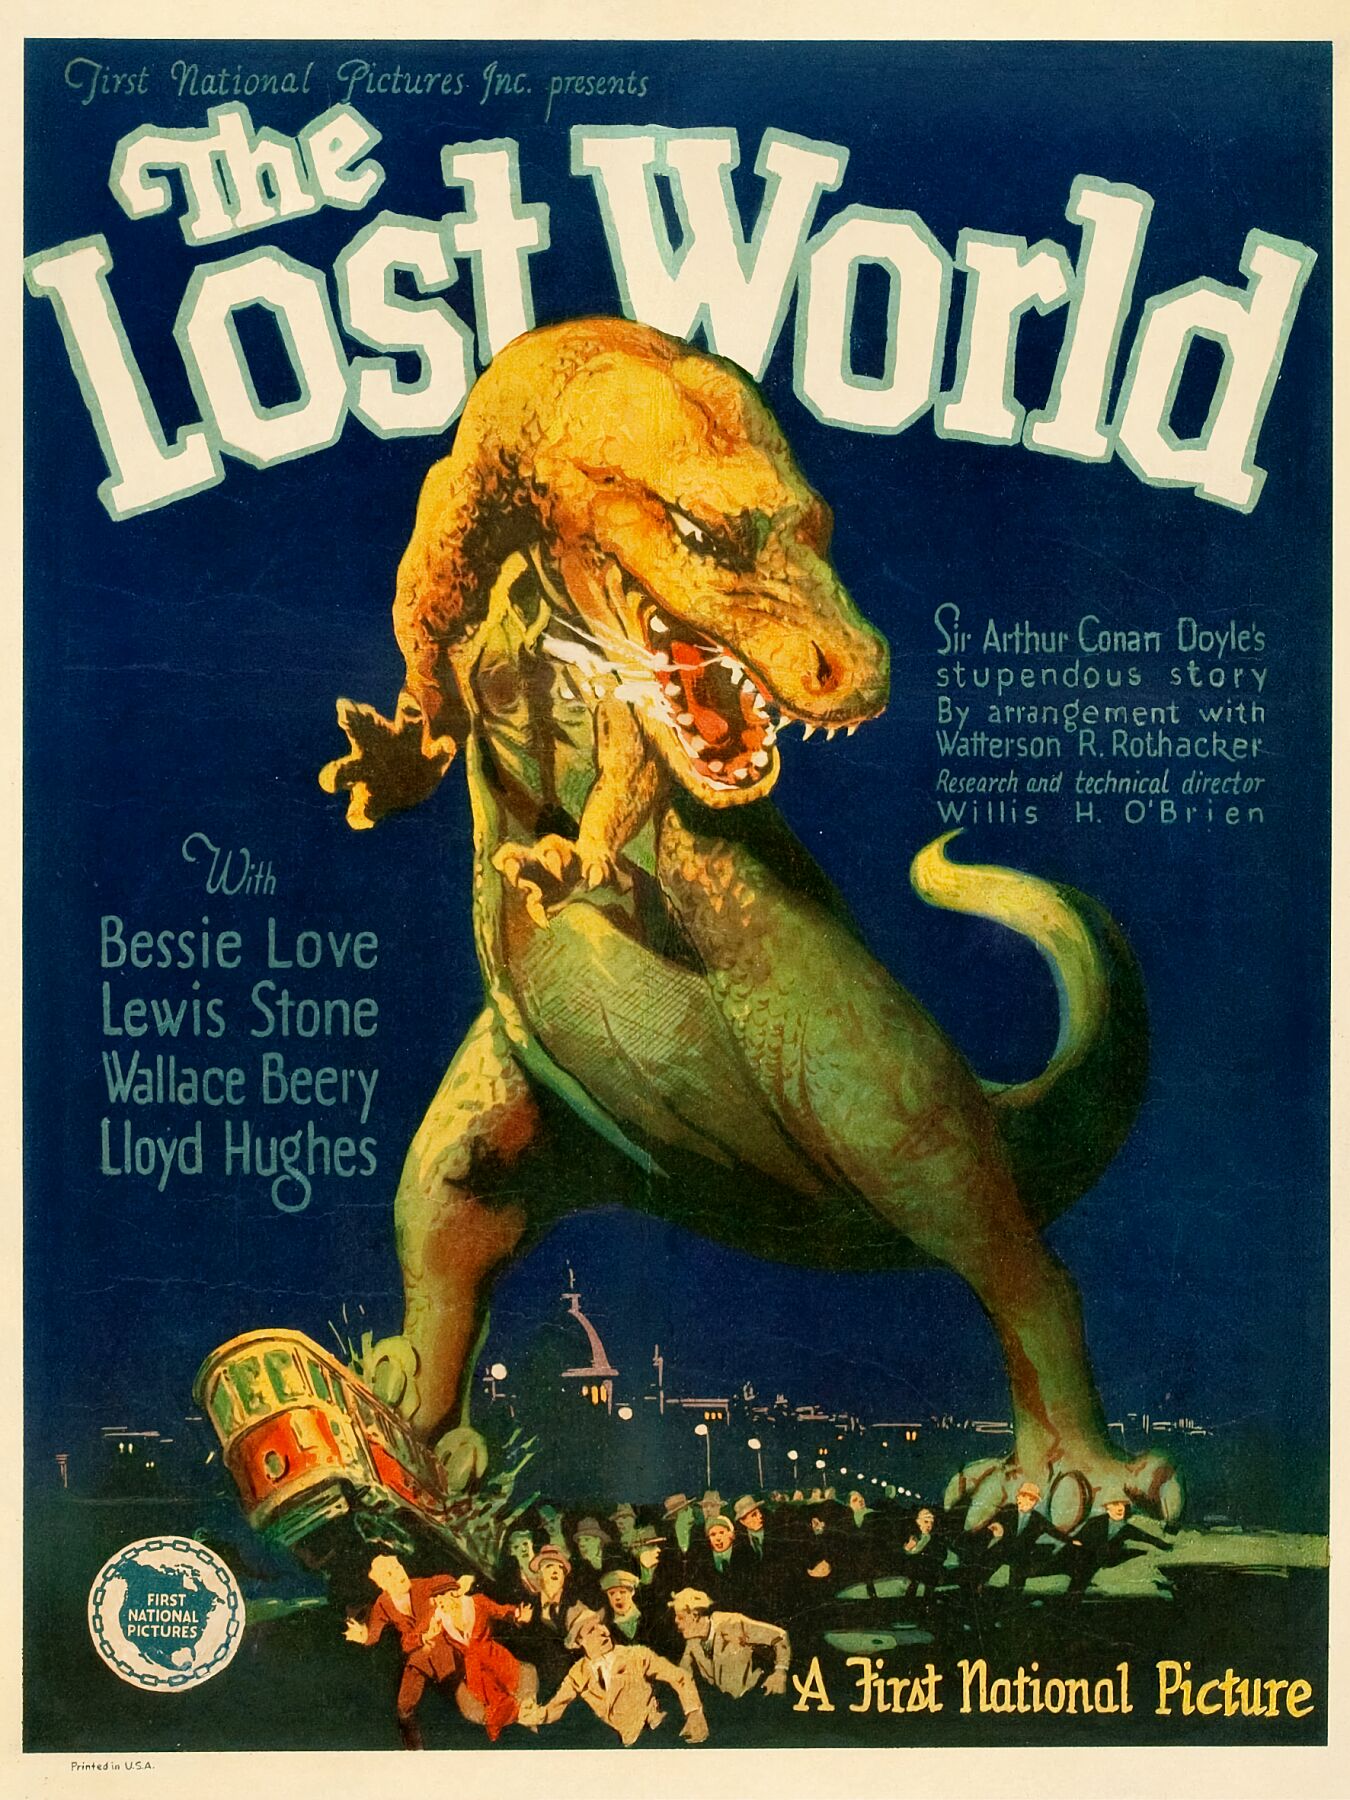 The Lost_World - 1925